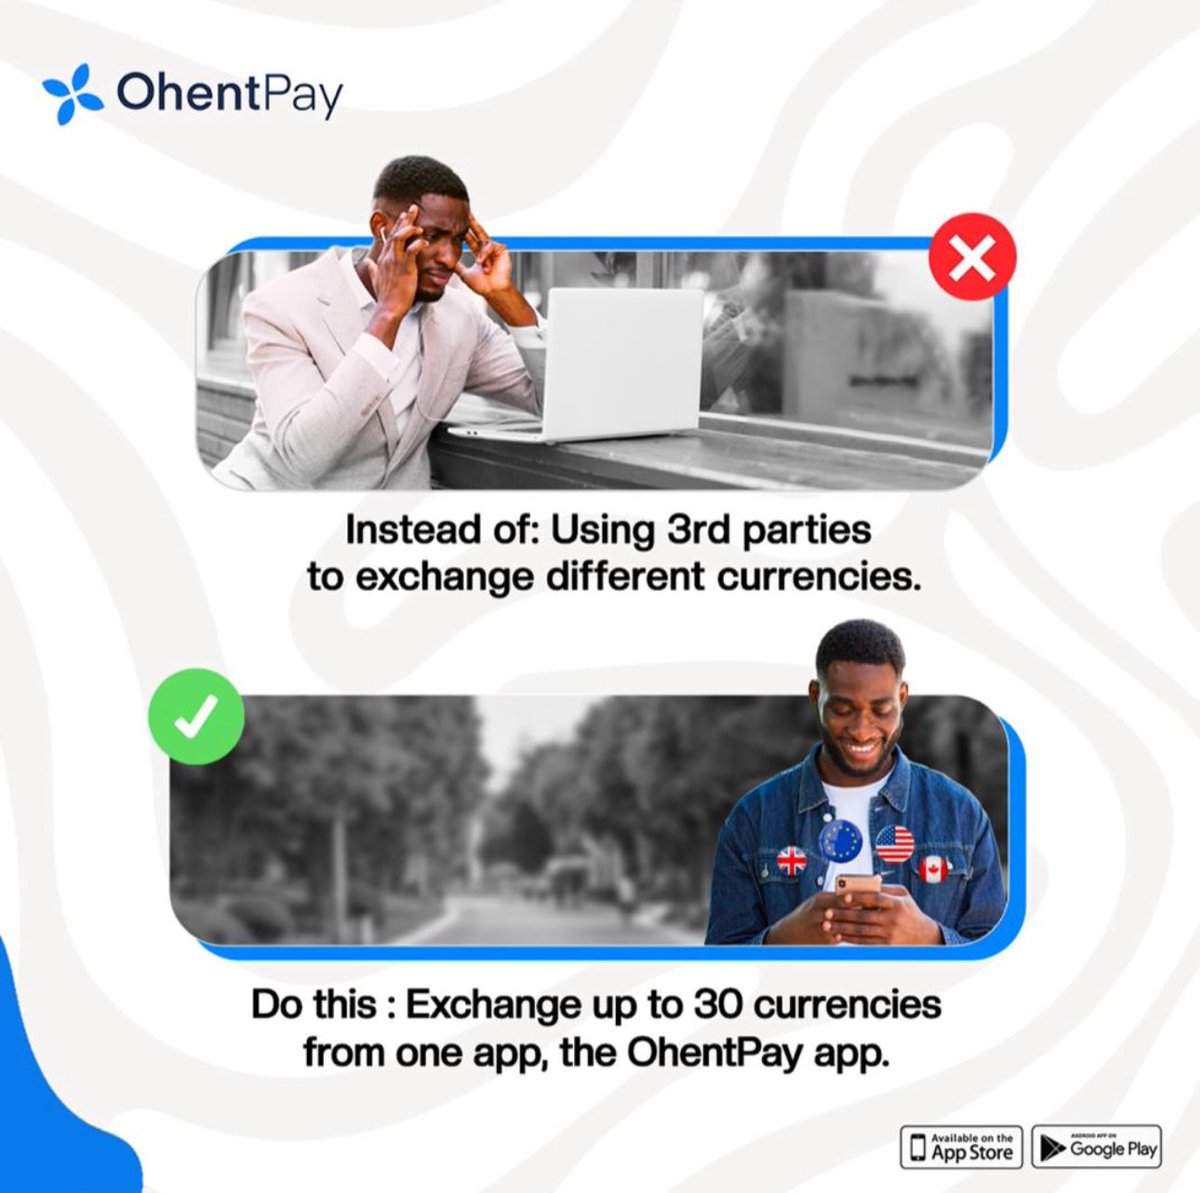 Exchange money hassle-free in local currency with @ohentpay mobile app! 

Download now to get started on seamless exchanges today. 

#OhentPay #MoneyExchange #CurrencyExchange